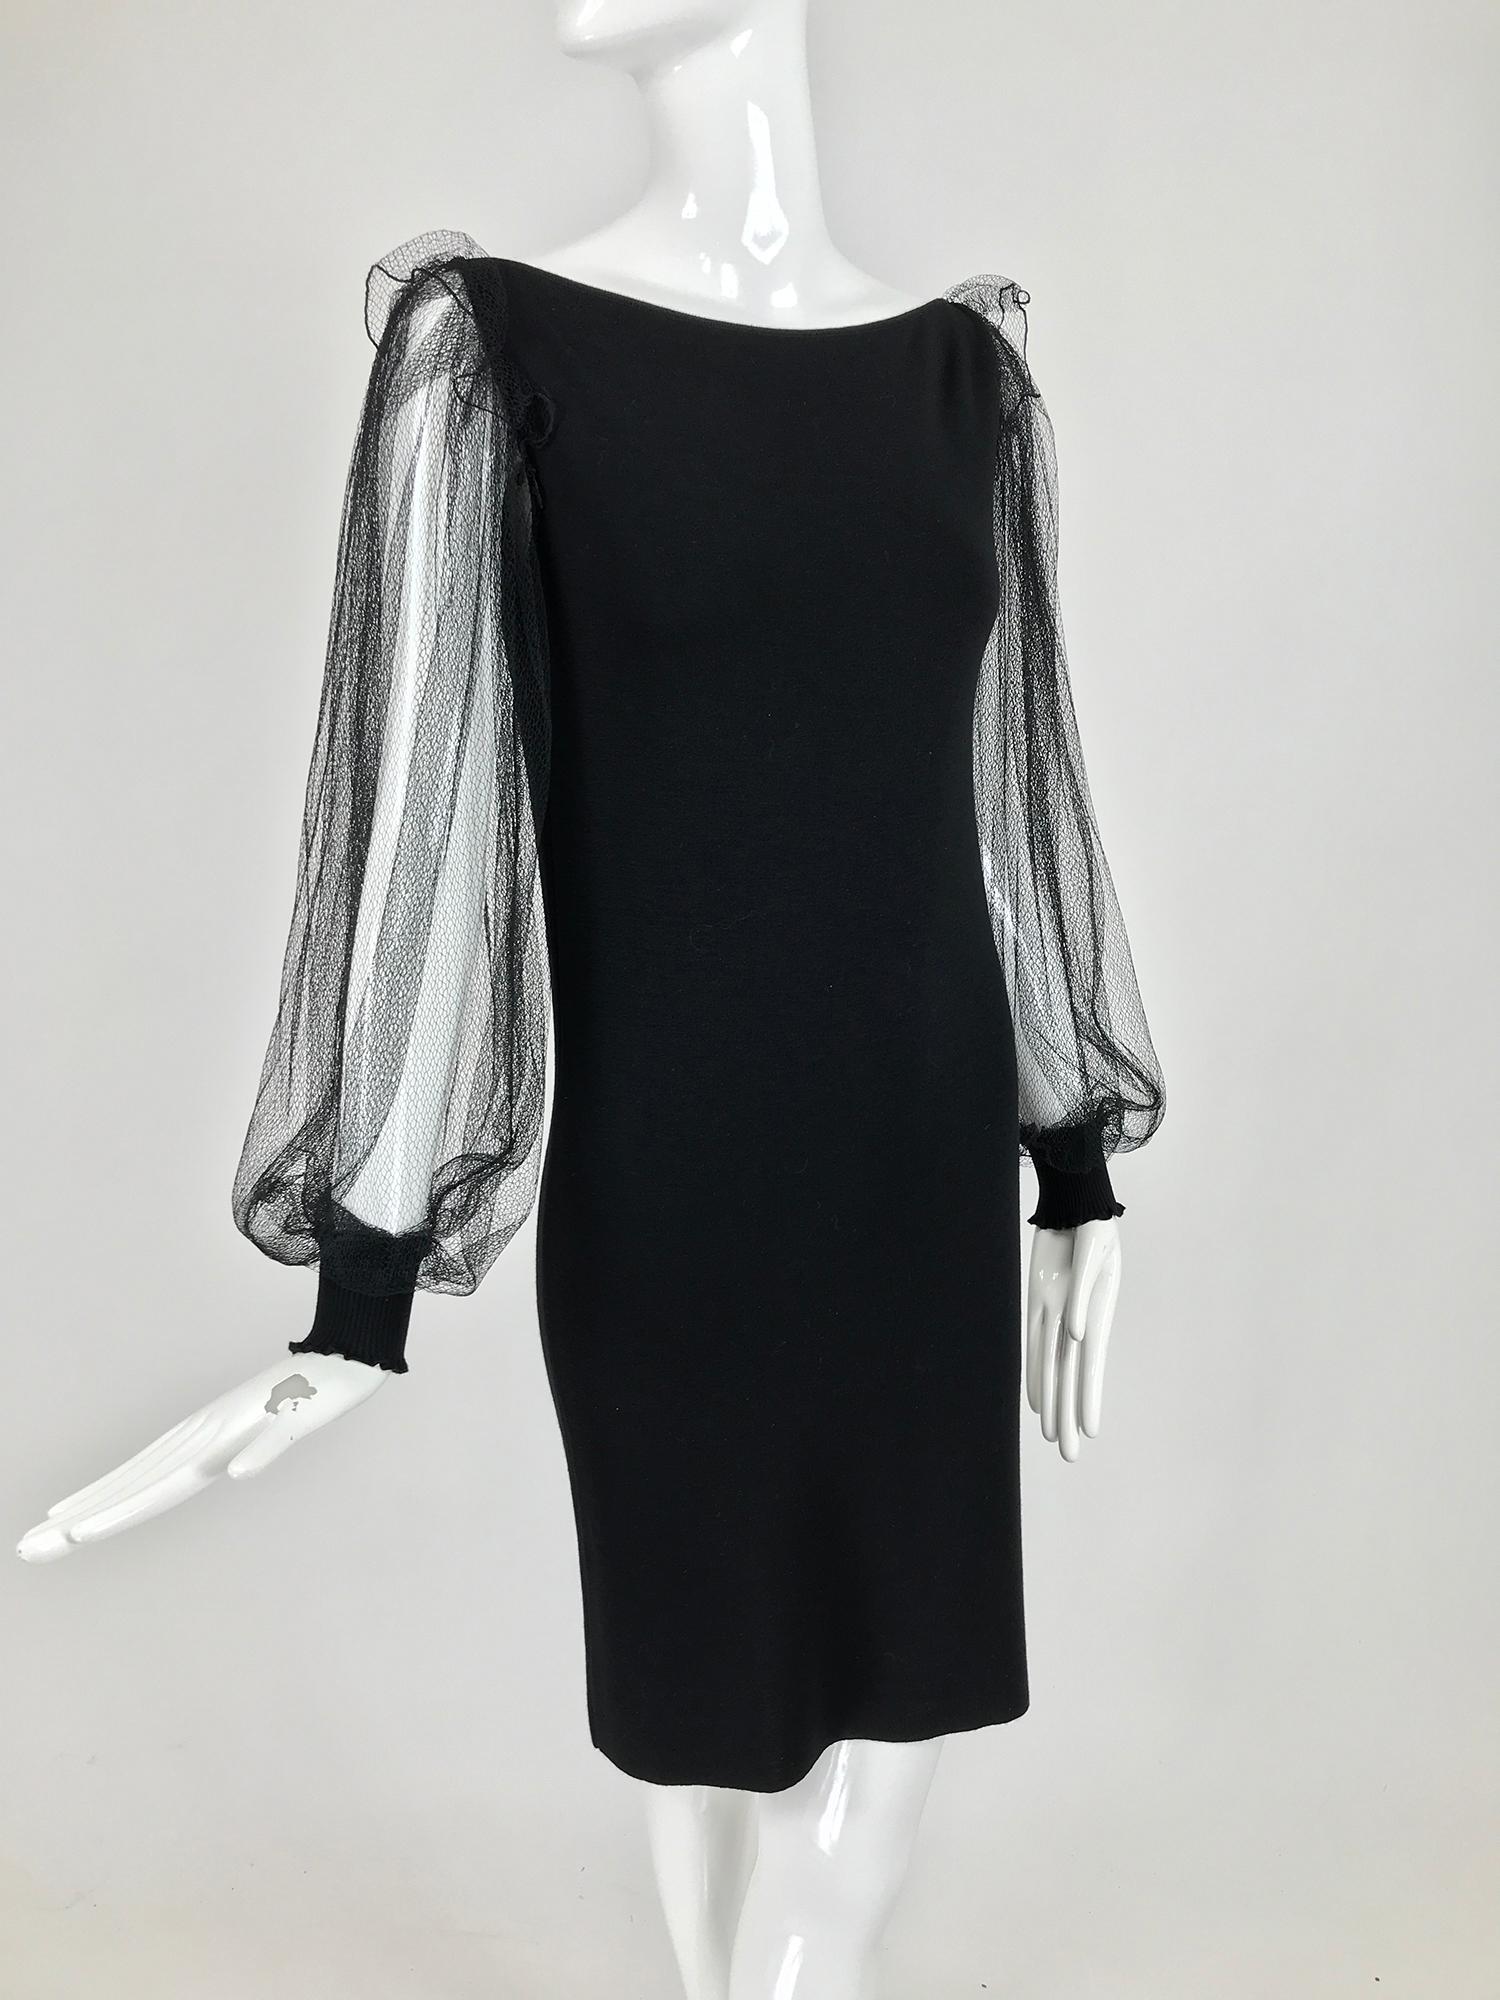 Loris Azzaro black stretch wool/cashmere knit sheath dress with long full black net sleeves. This amazing dress has a bateau neckline the dress hugs the body with a bit of stretch, the sleeves of fine black net attached at the shoulder with a ruffle